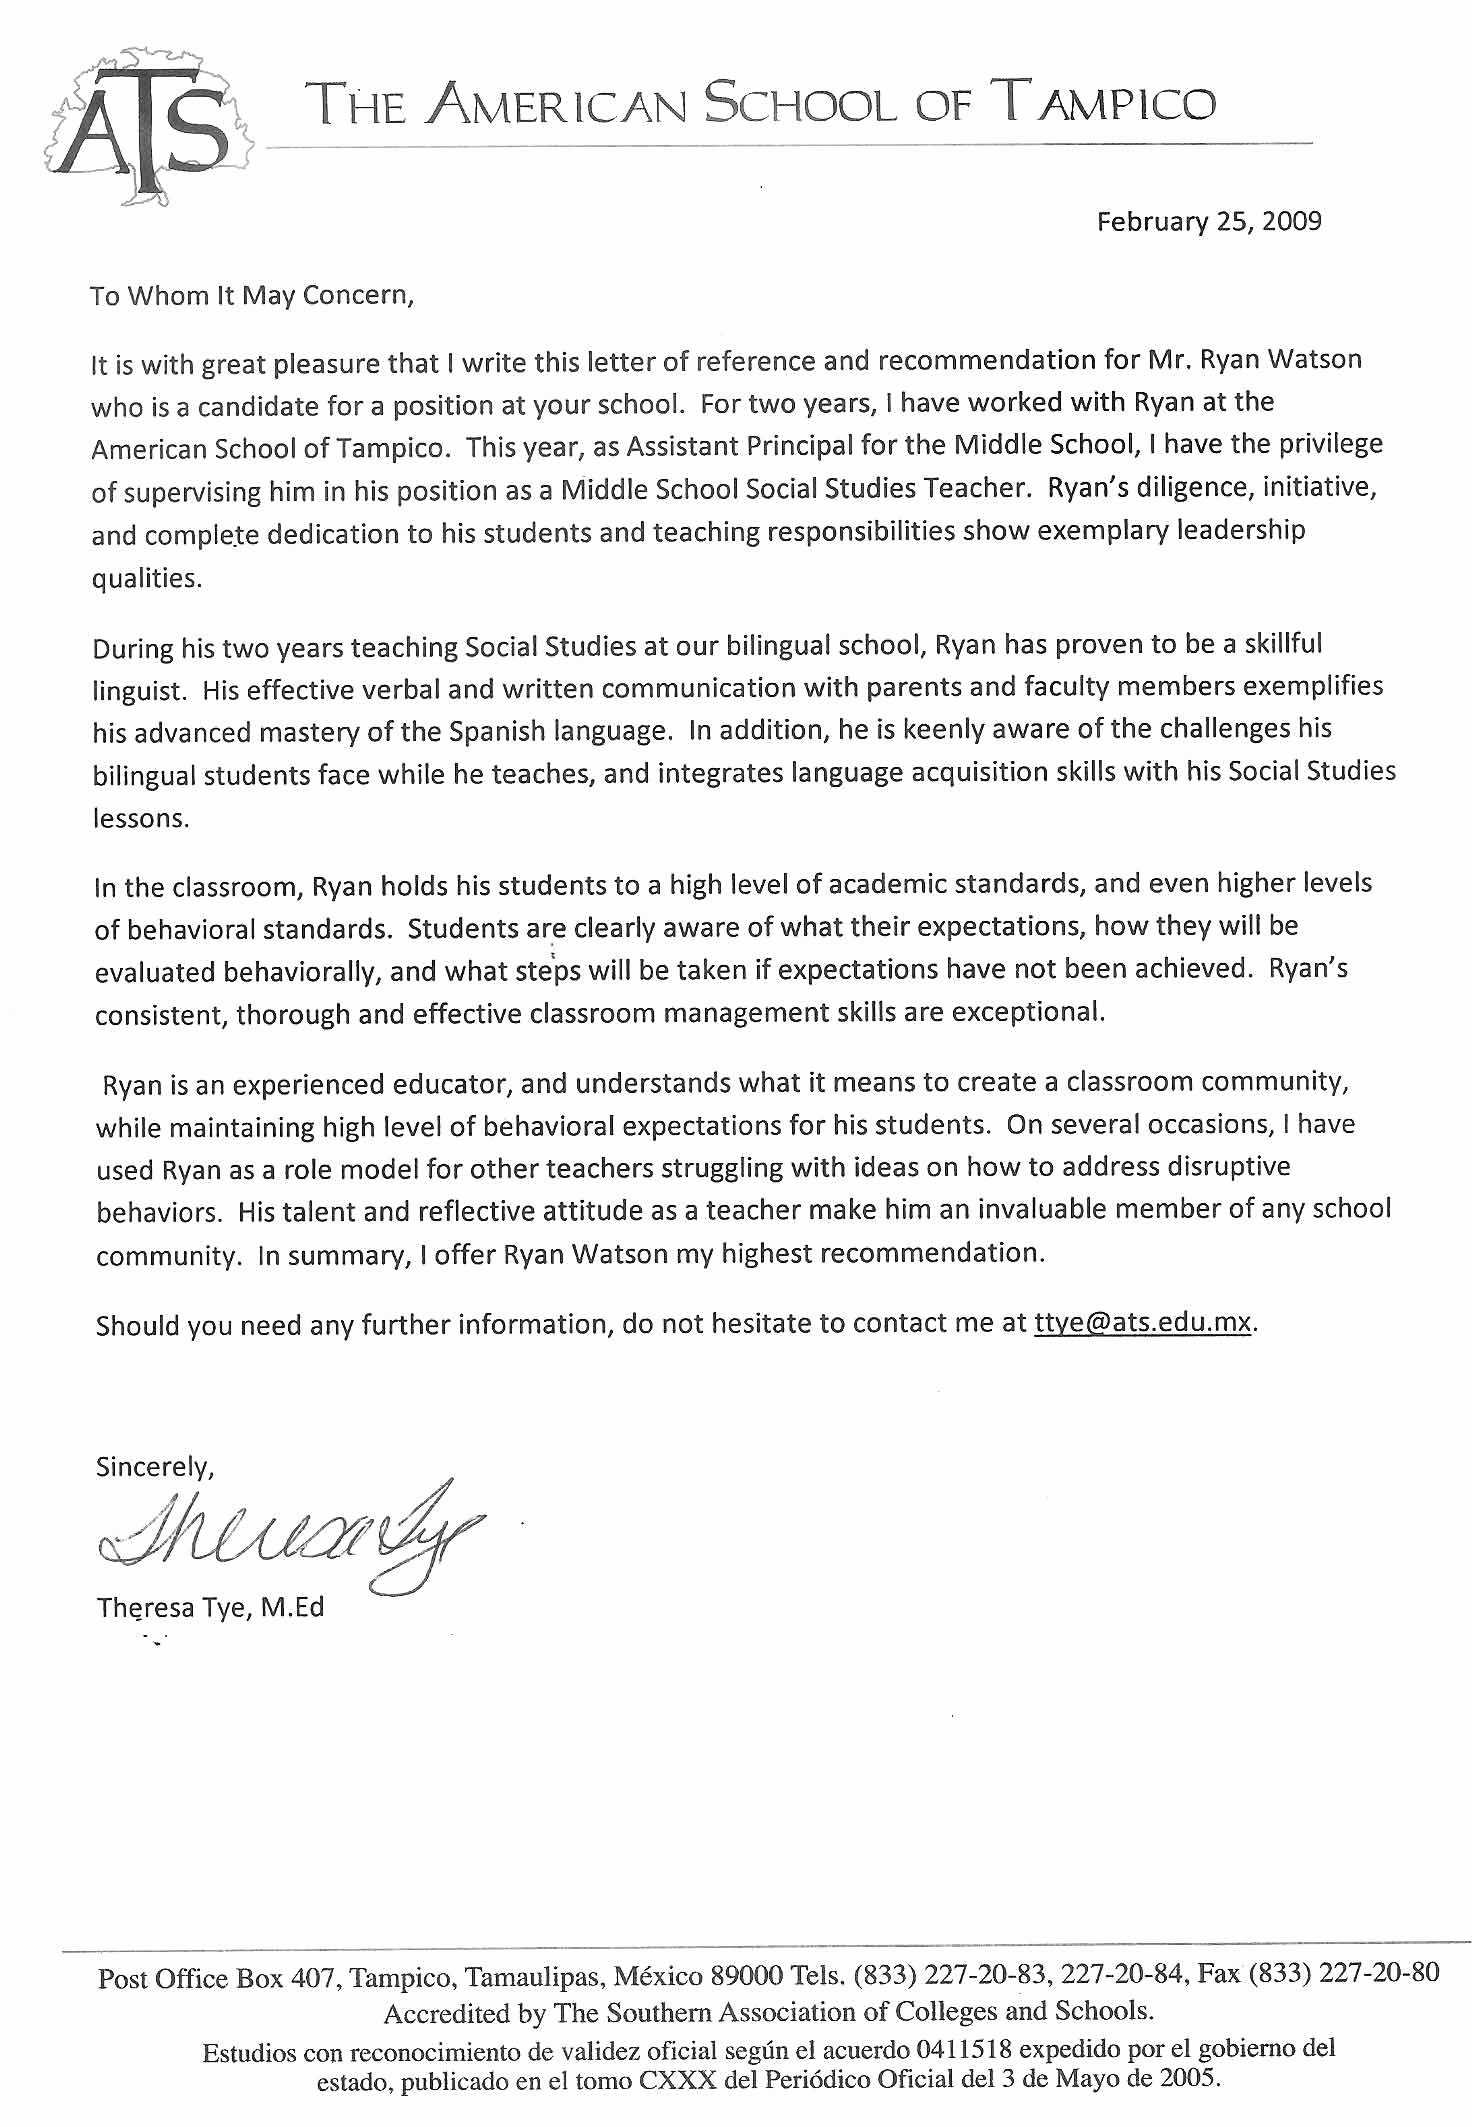 Uw Madison Letter Of Recommendation Fresh Ryan A Watson